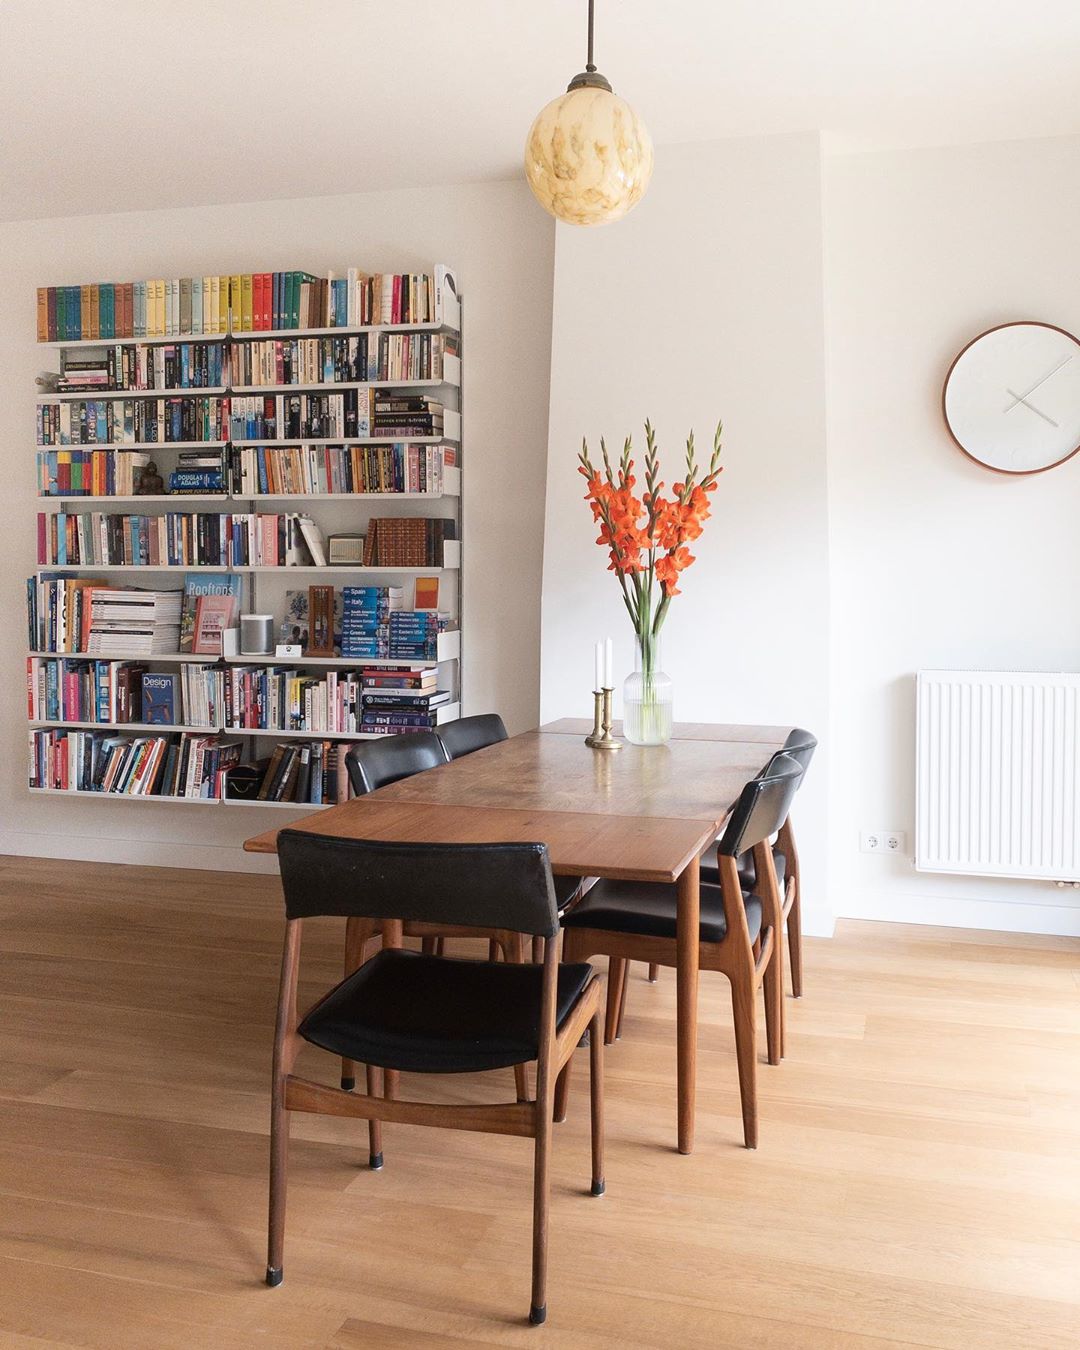 Mid-Century Modern table and chairs in white room. Photo by Instagram user @midcenturytoday